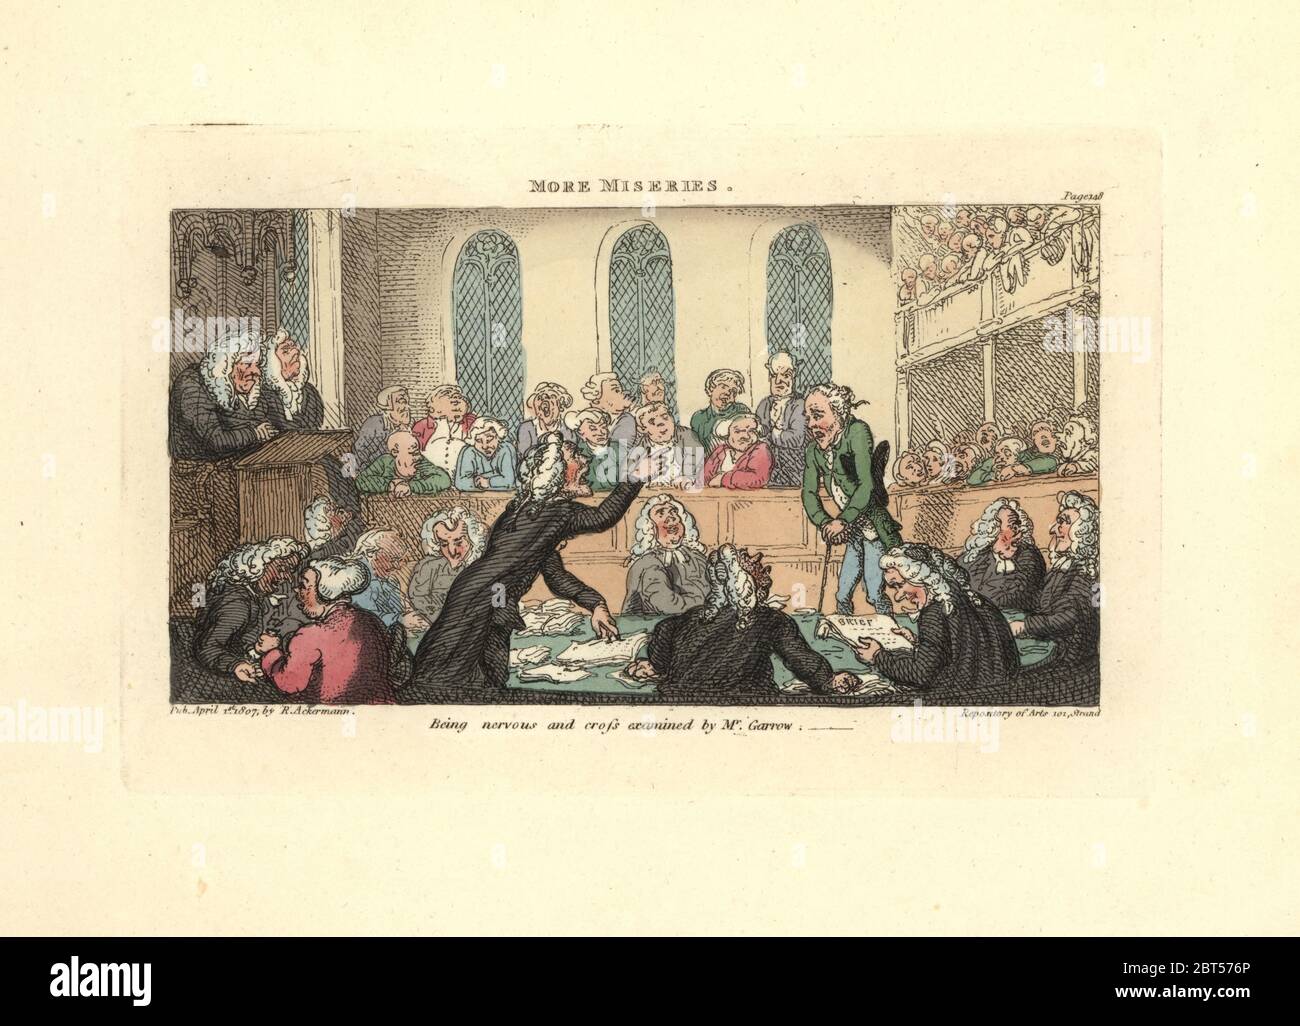 Being nervous and cross-examined by lawyer Mr. Garrow in court. More Miseries. Handcoloured copperplate engraving designed and etched by Thomas Rowlandson to accompany Reverend James Beresfords Miseries of Human Life, Ackermann, 1808. Stock Photo